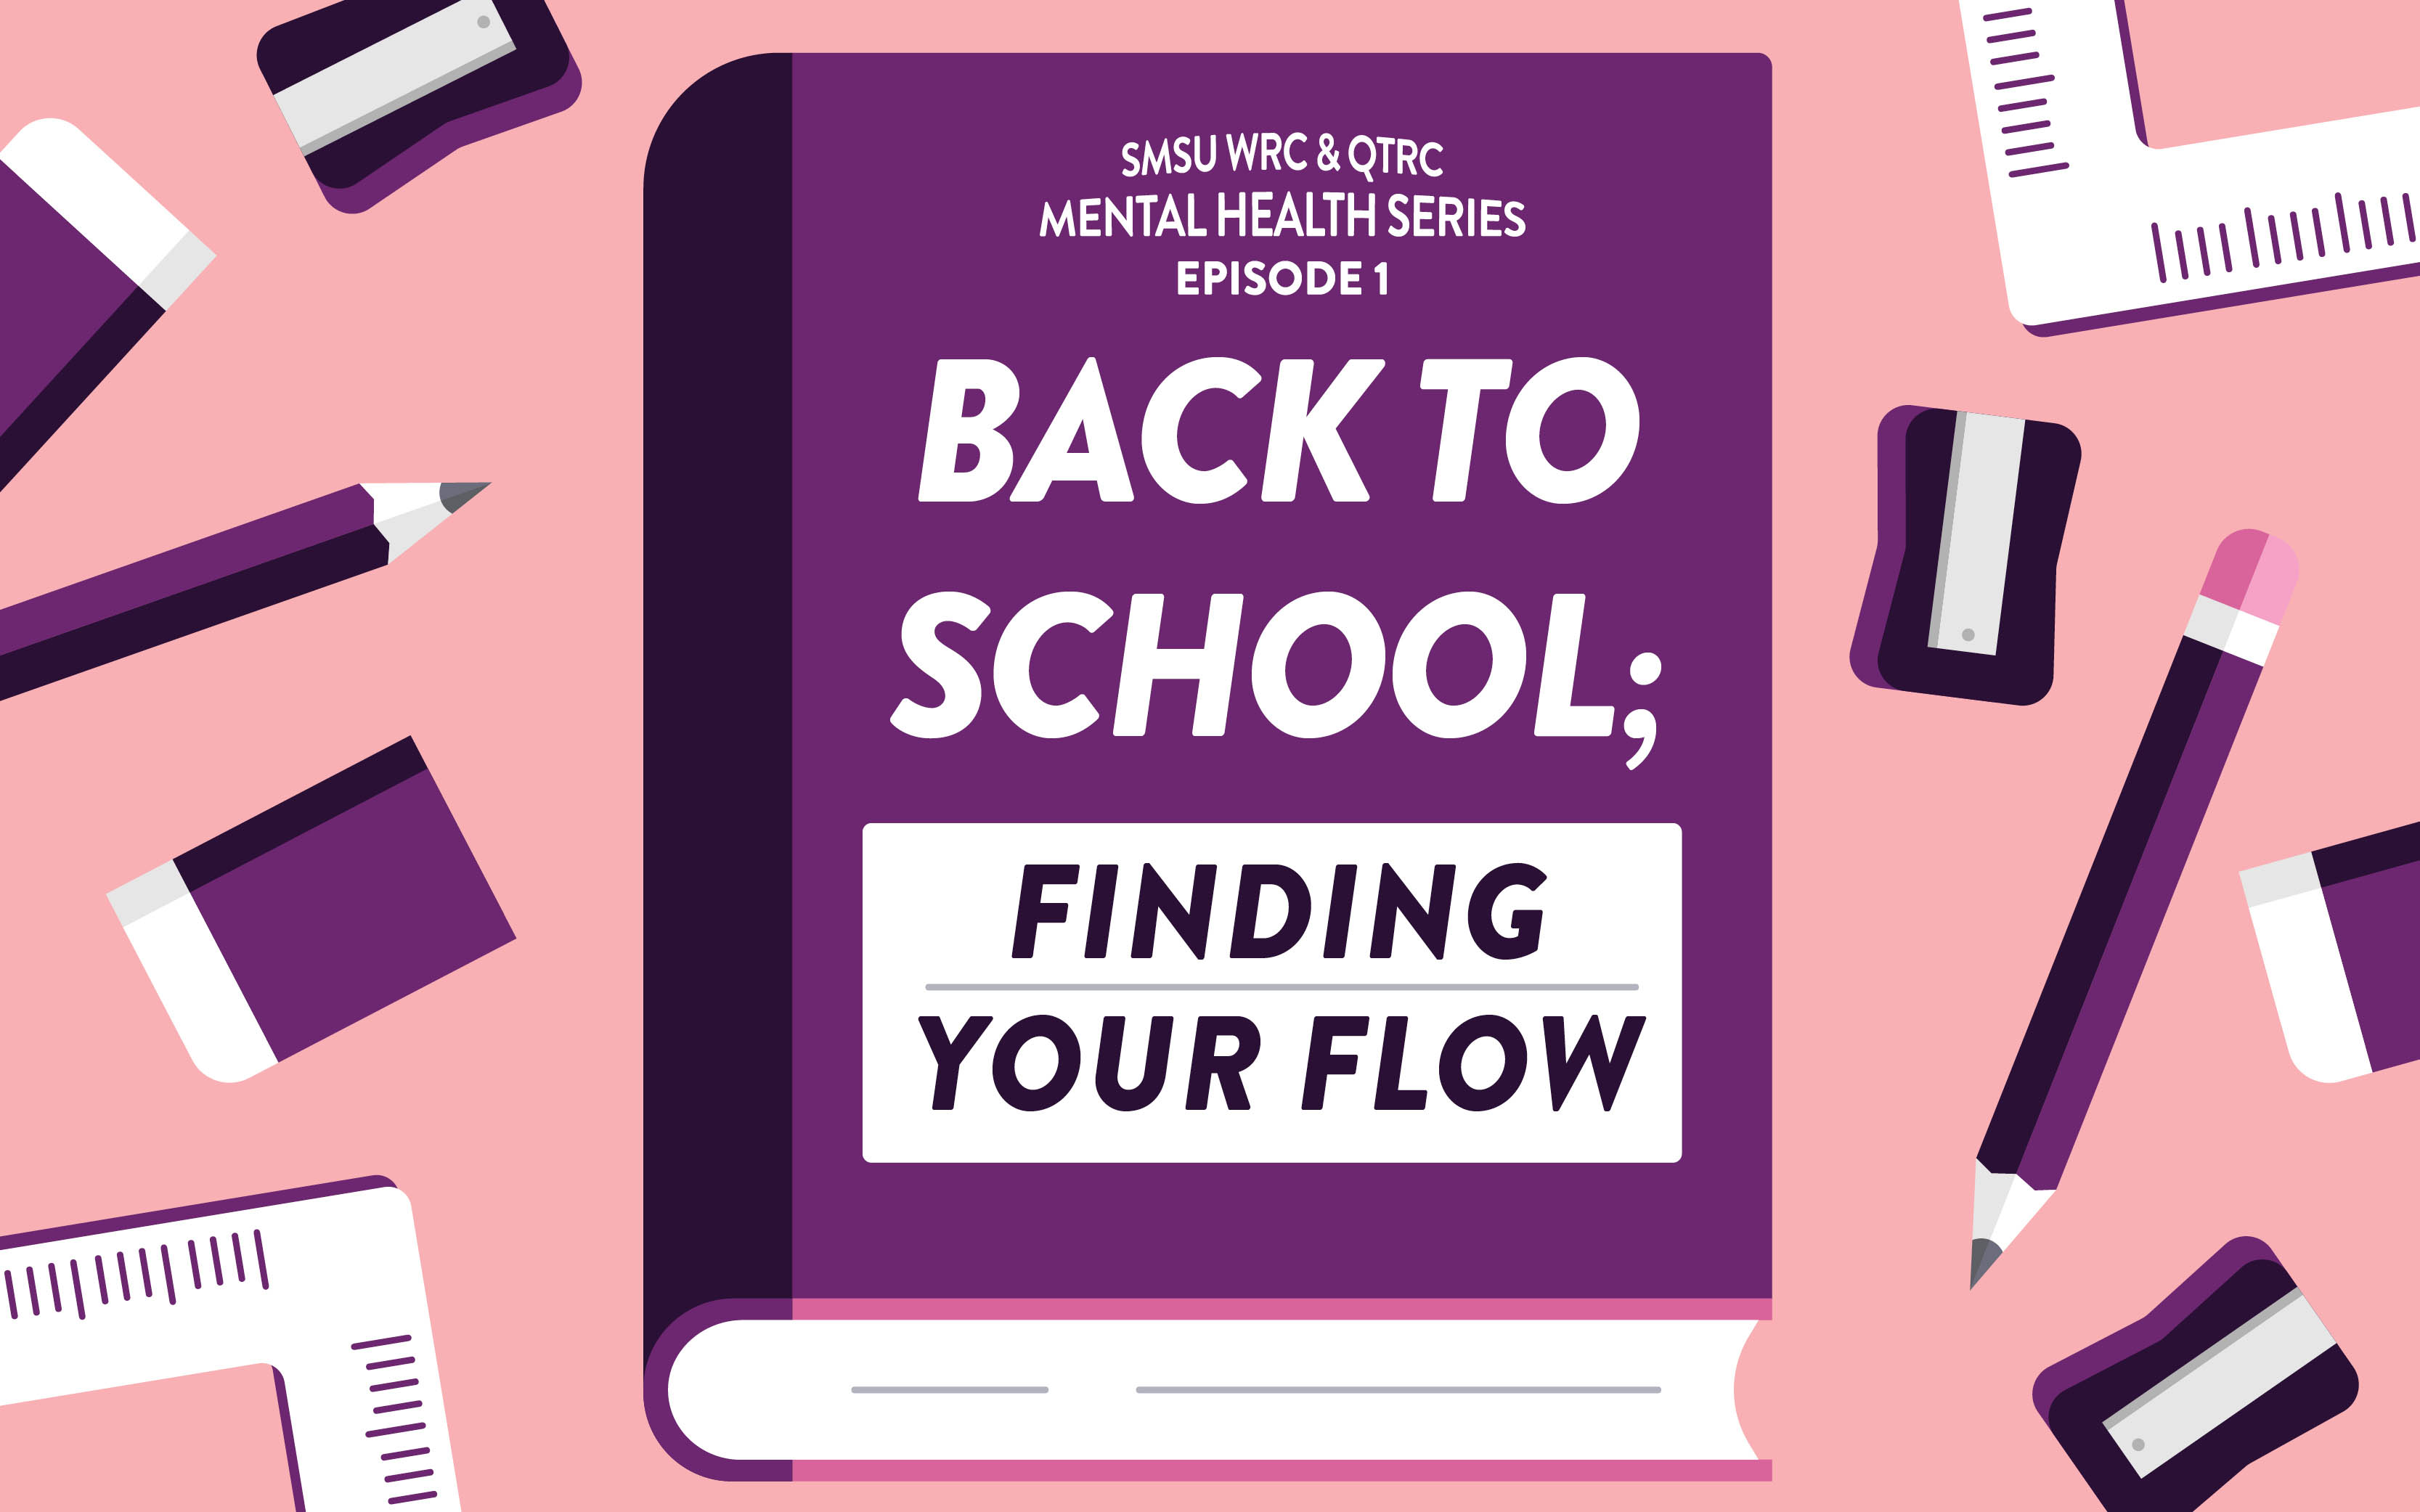 SMSU WRC & QTRC Mental Health Series Episode 1 | Back to School: Finding Your Flow